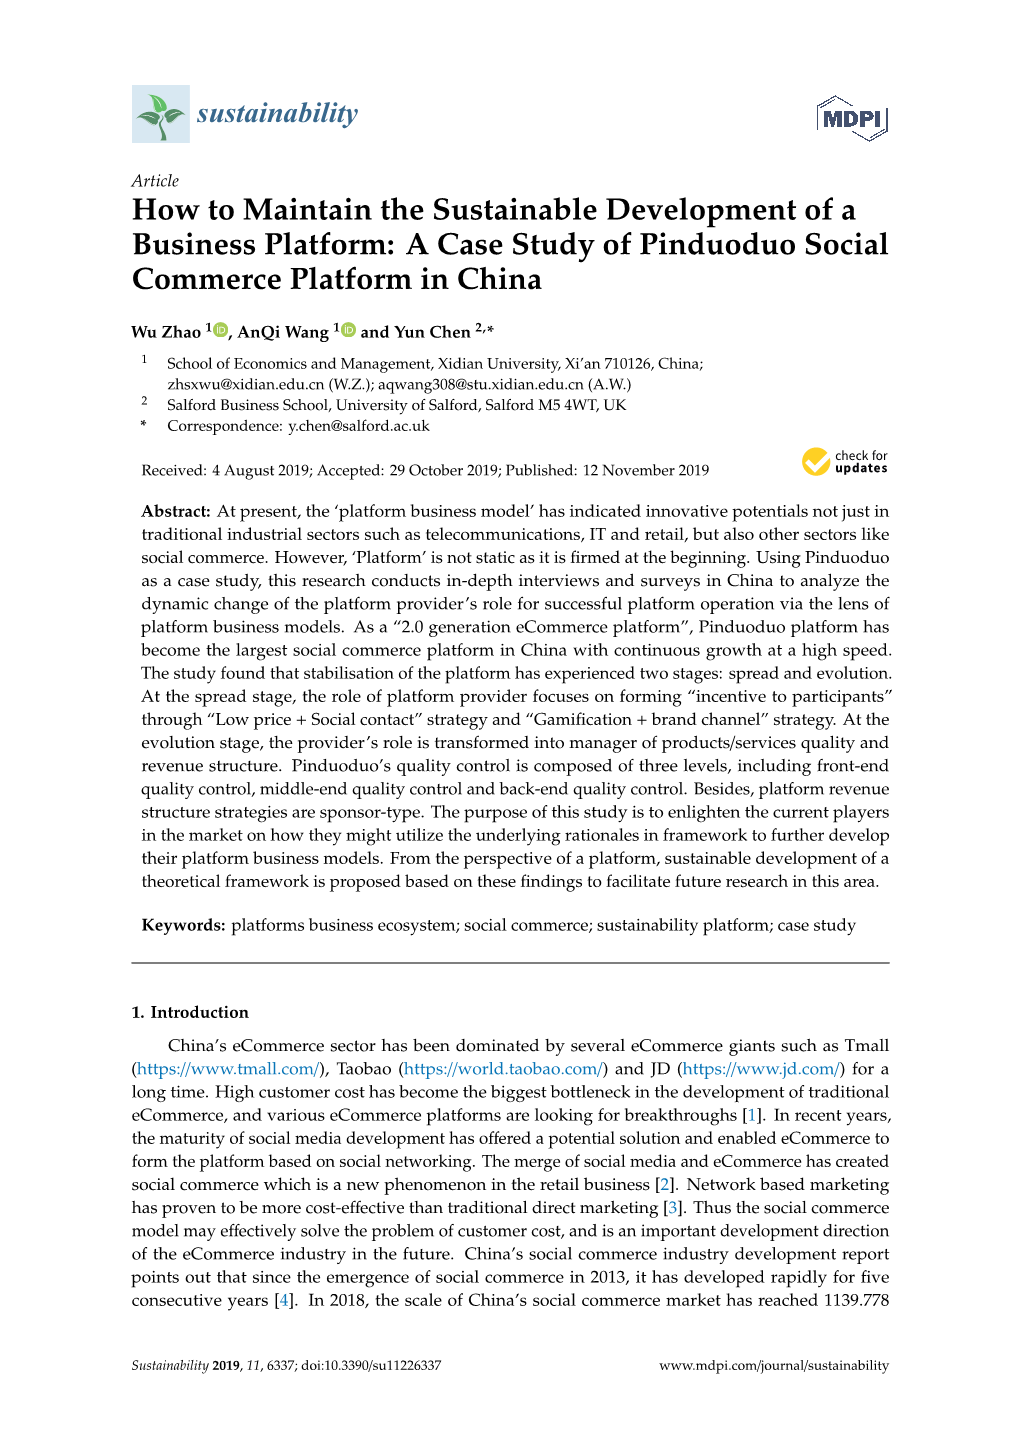 A Case Study of Pinduoduo Social Commerce Platform in China